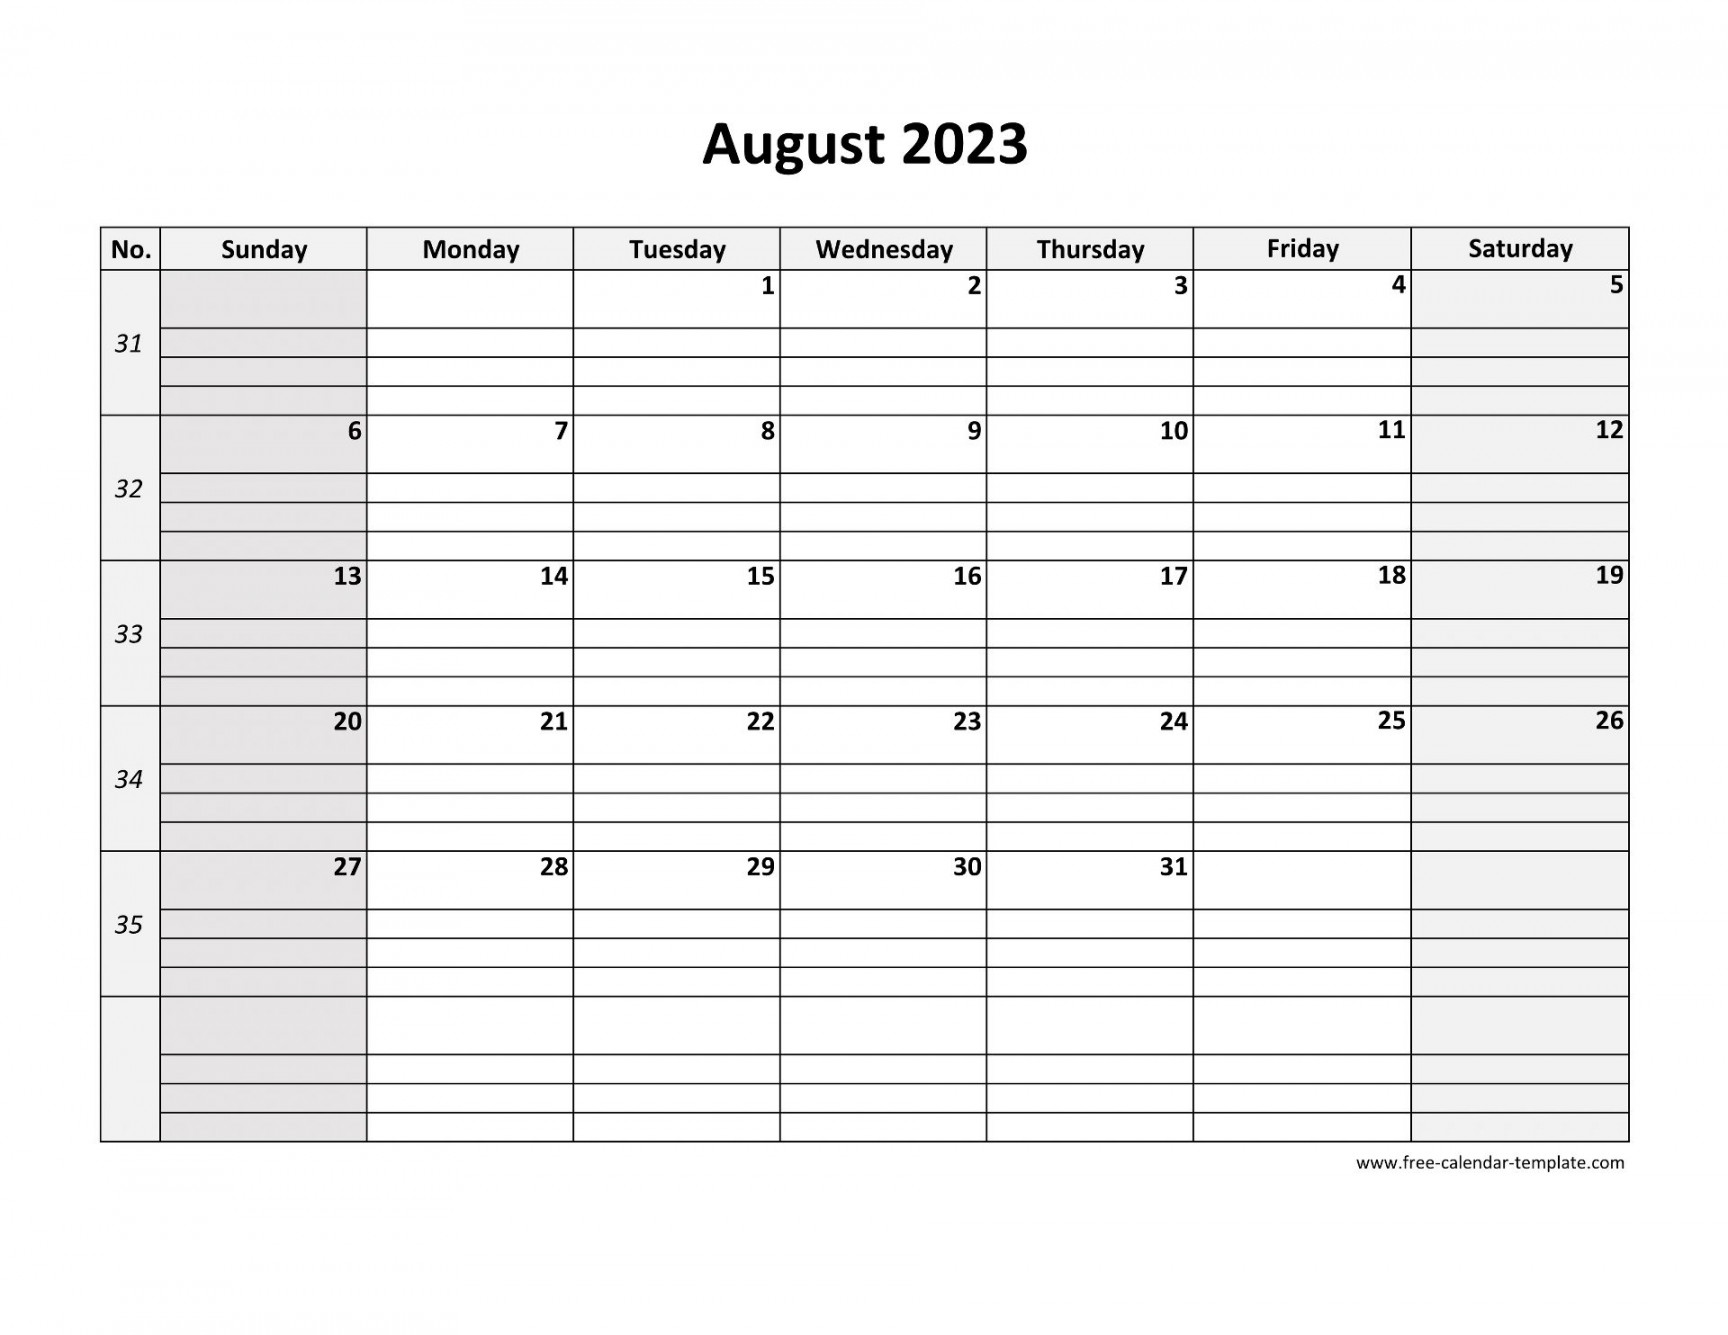 August  Calendar Free Printable with grid lines designed